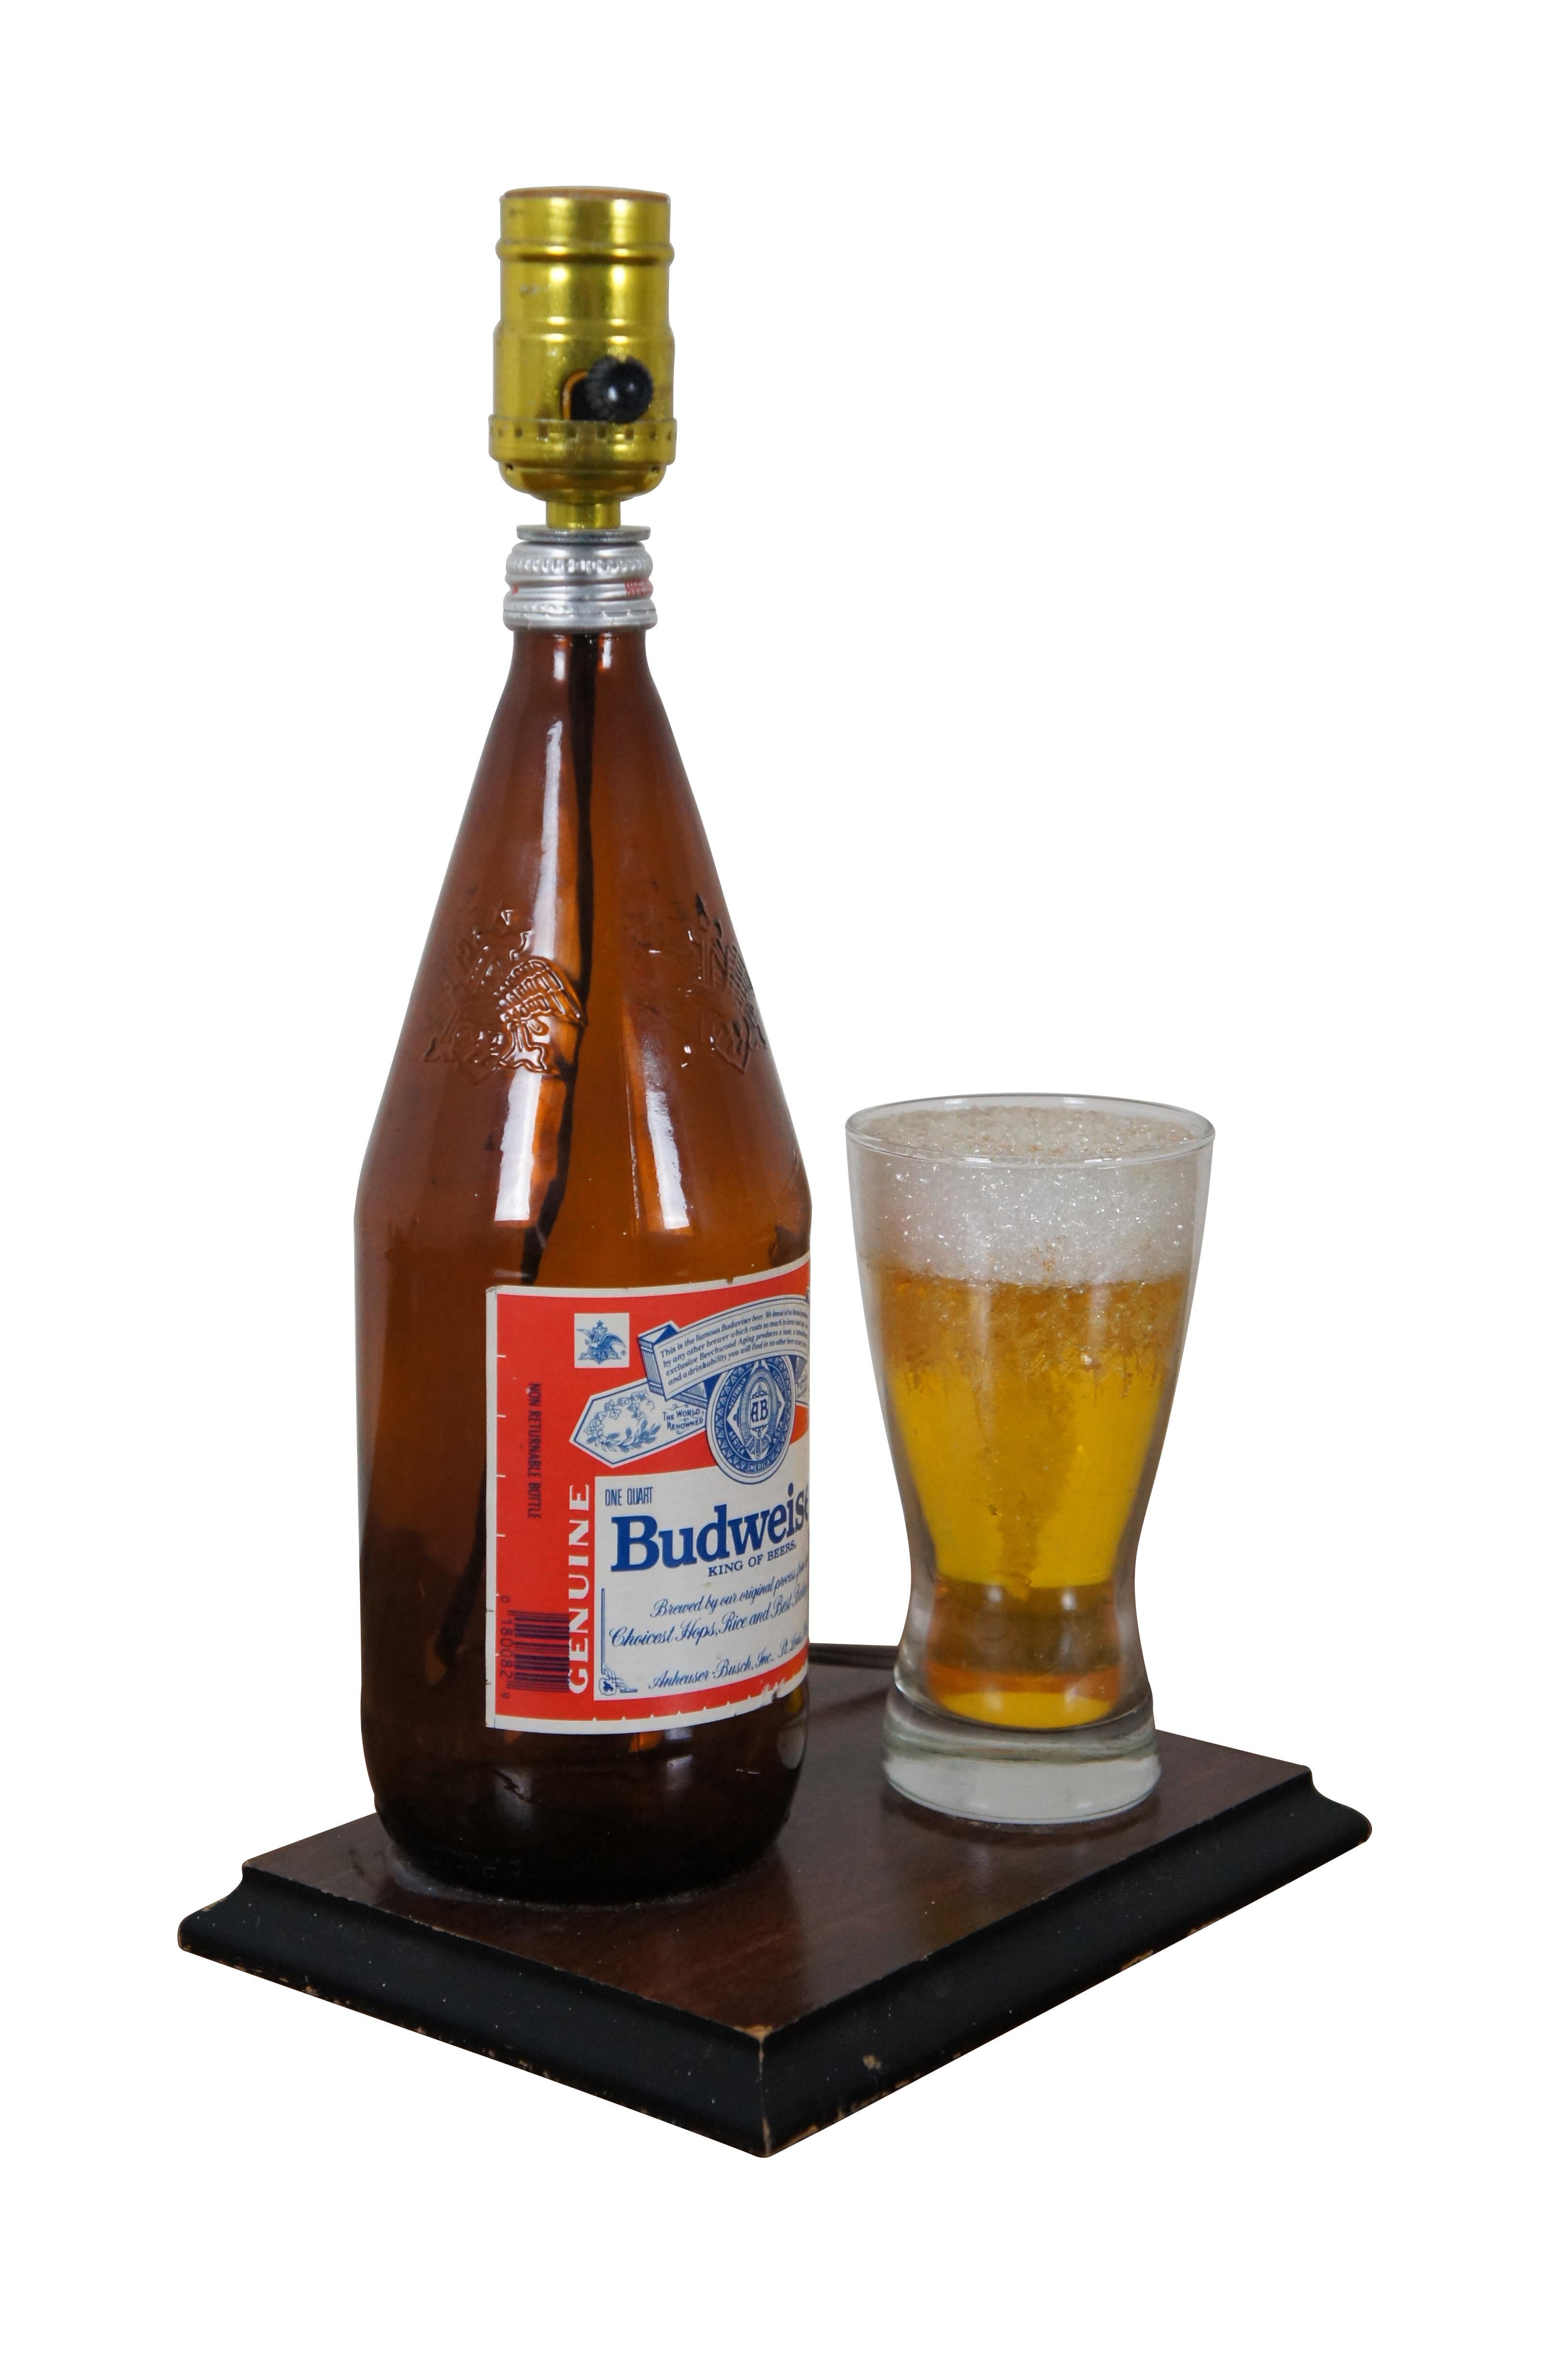 Vintage beer bottle and drinking glass table lamp, crafted from a repurposed Budweiser beer bottle, mounted on a wooden plaque for a base, next to a beer glass filled with amber colored resin “beer” and topped with a frothy Styrofoam “head.”